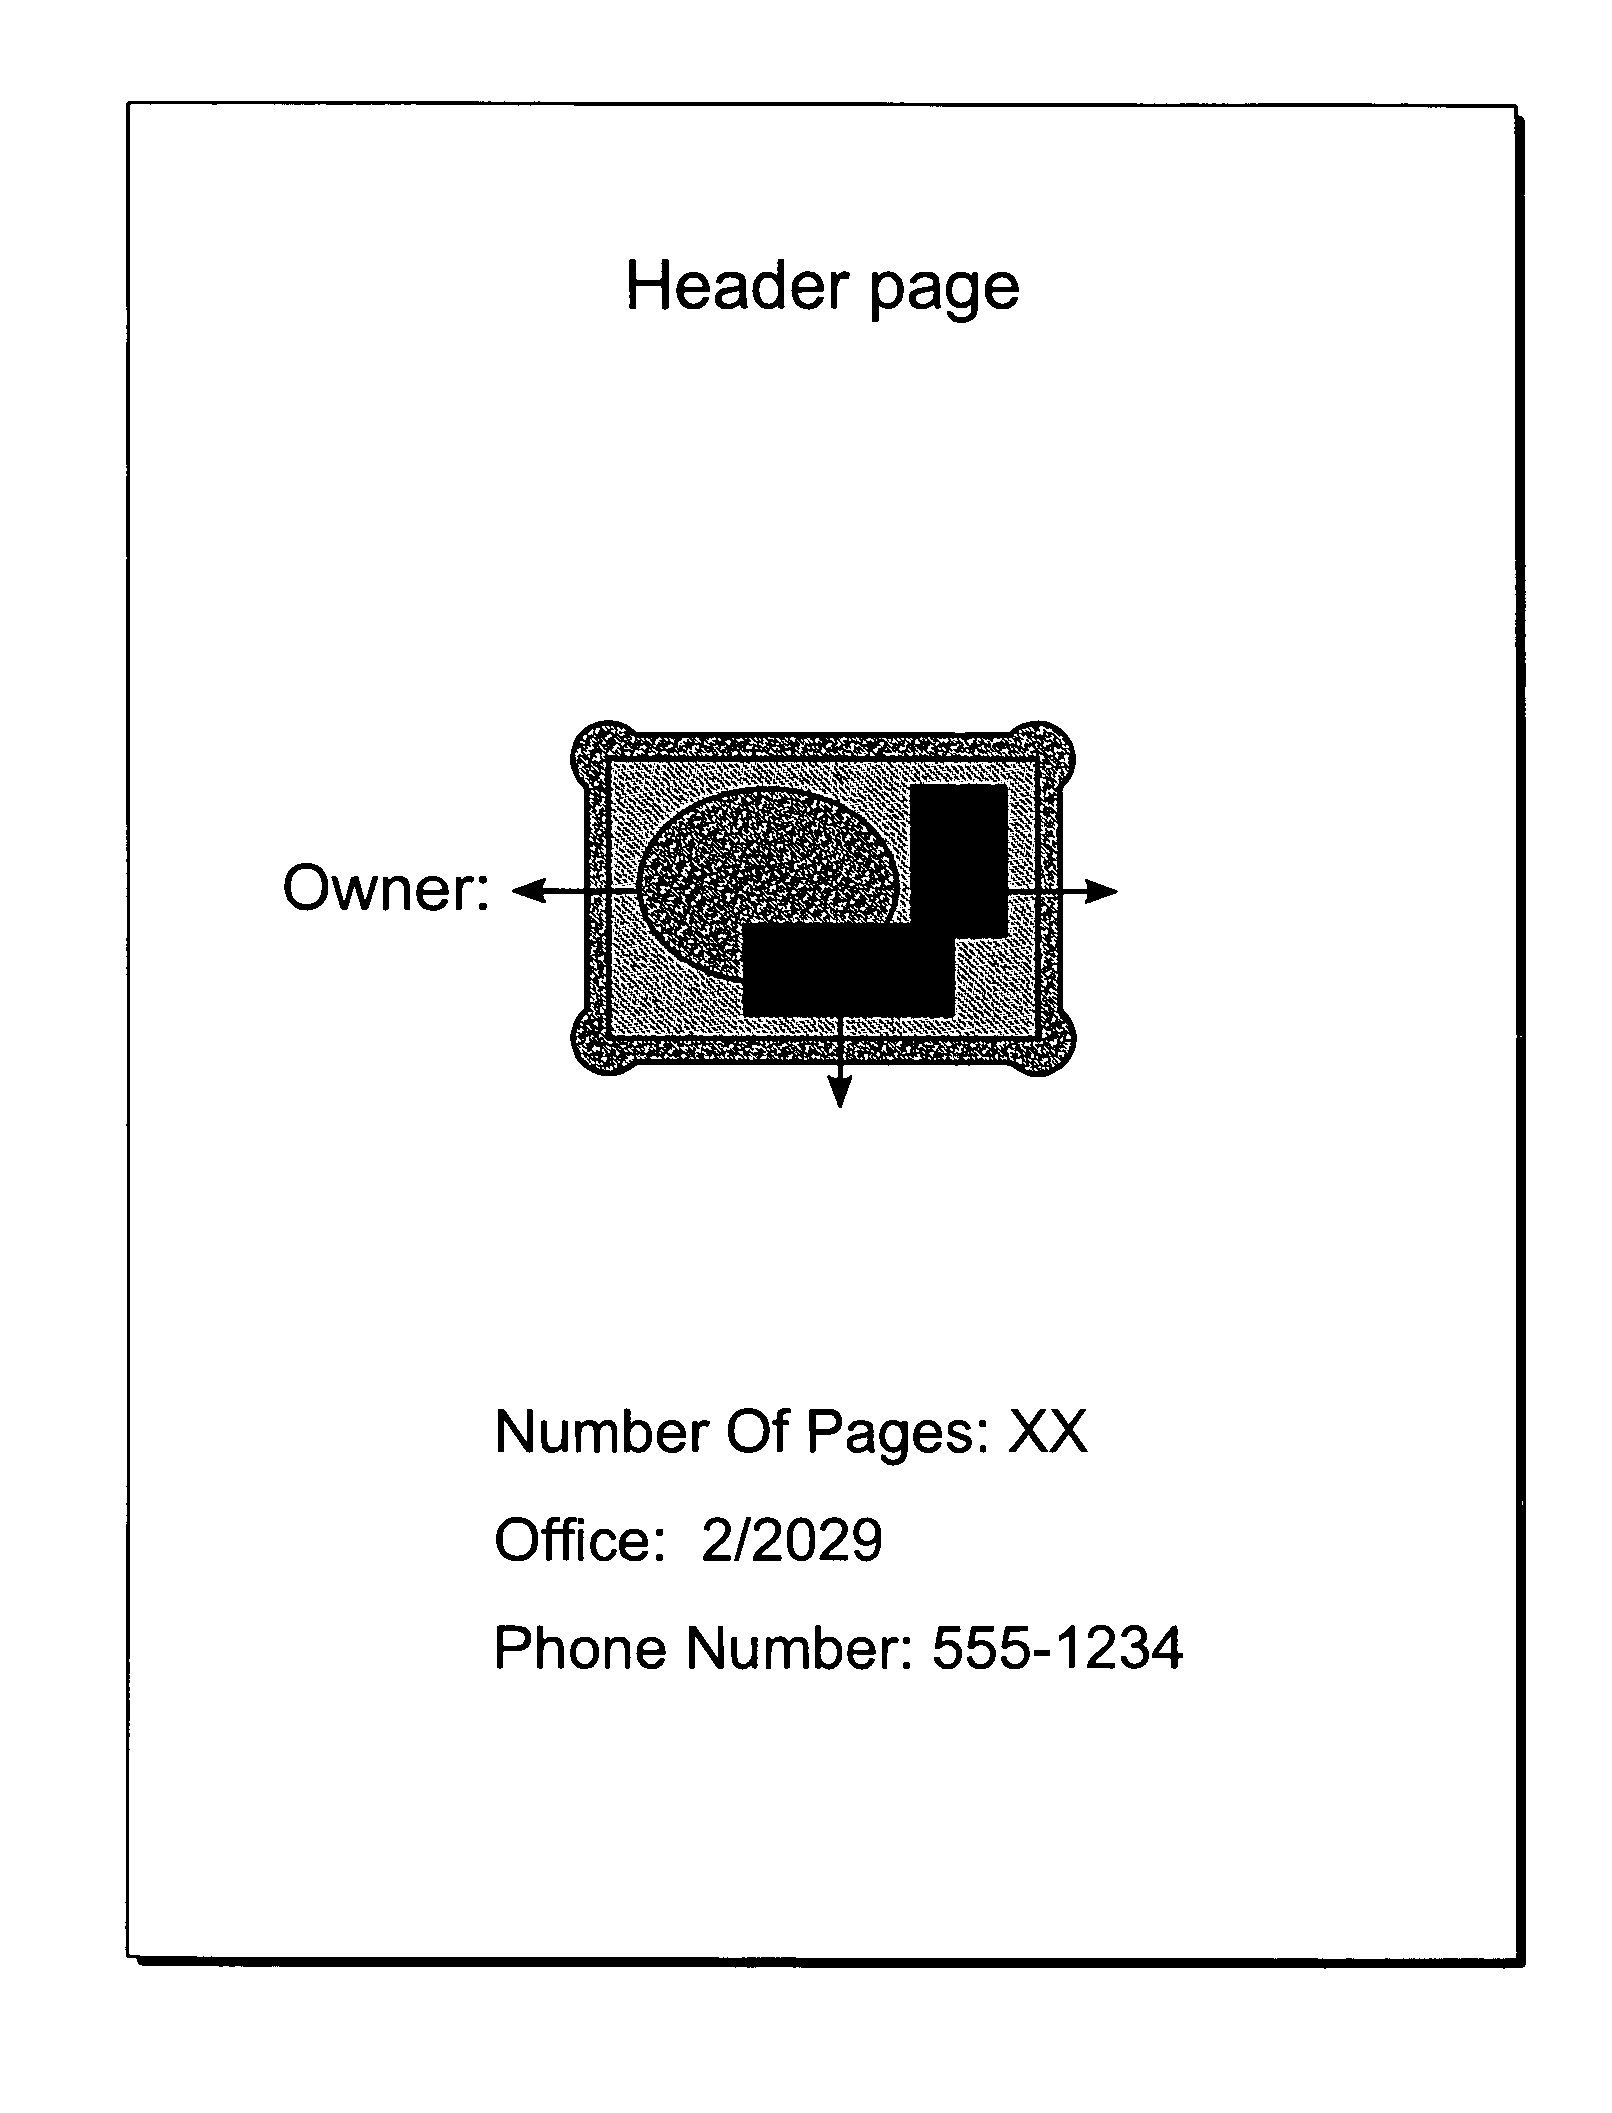 Printing user-created custom header/footer/separator pages from the printer driver